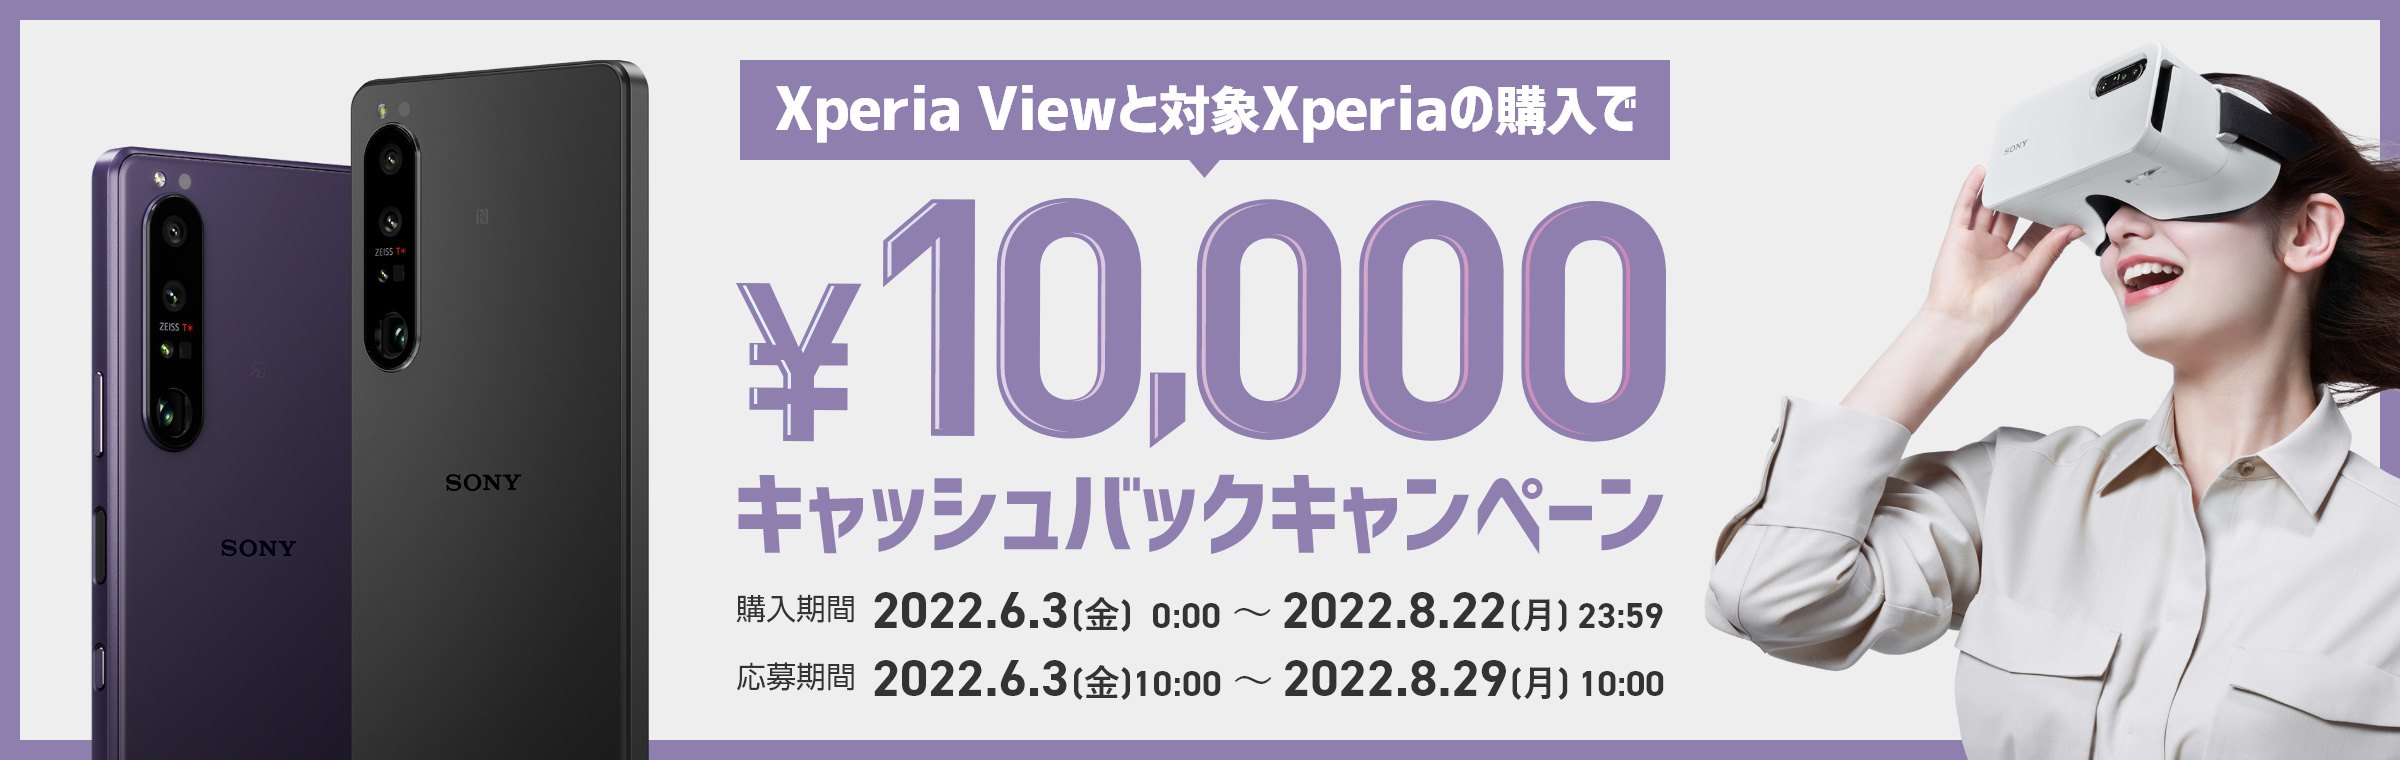 Xperia Viewと対象Xperiaの購入で￥10,000キャッシュバックキャンペーン 購入期間：2022.6/3(金)0:00～2022.8/22(月)23:59 応募期間：2022.6/3(金)～2022.8/29(月)10:00